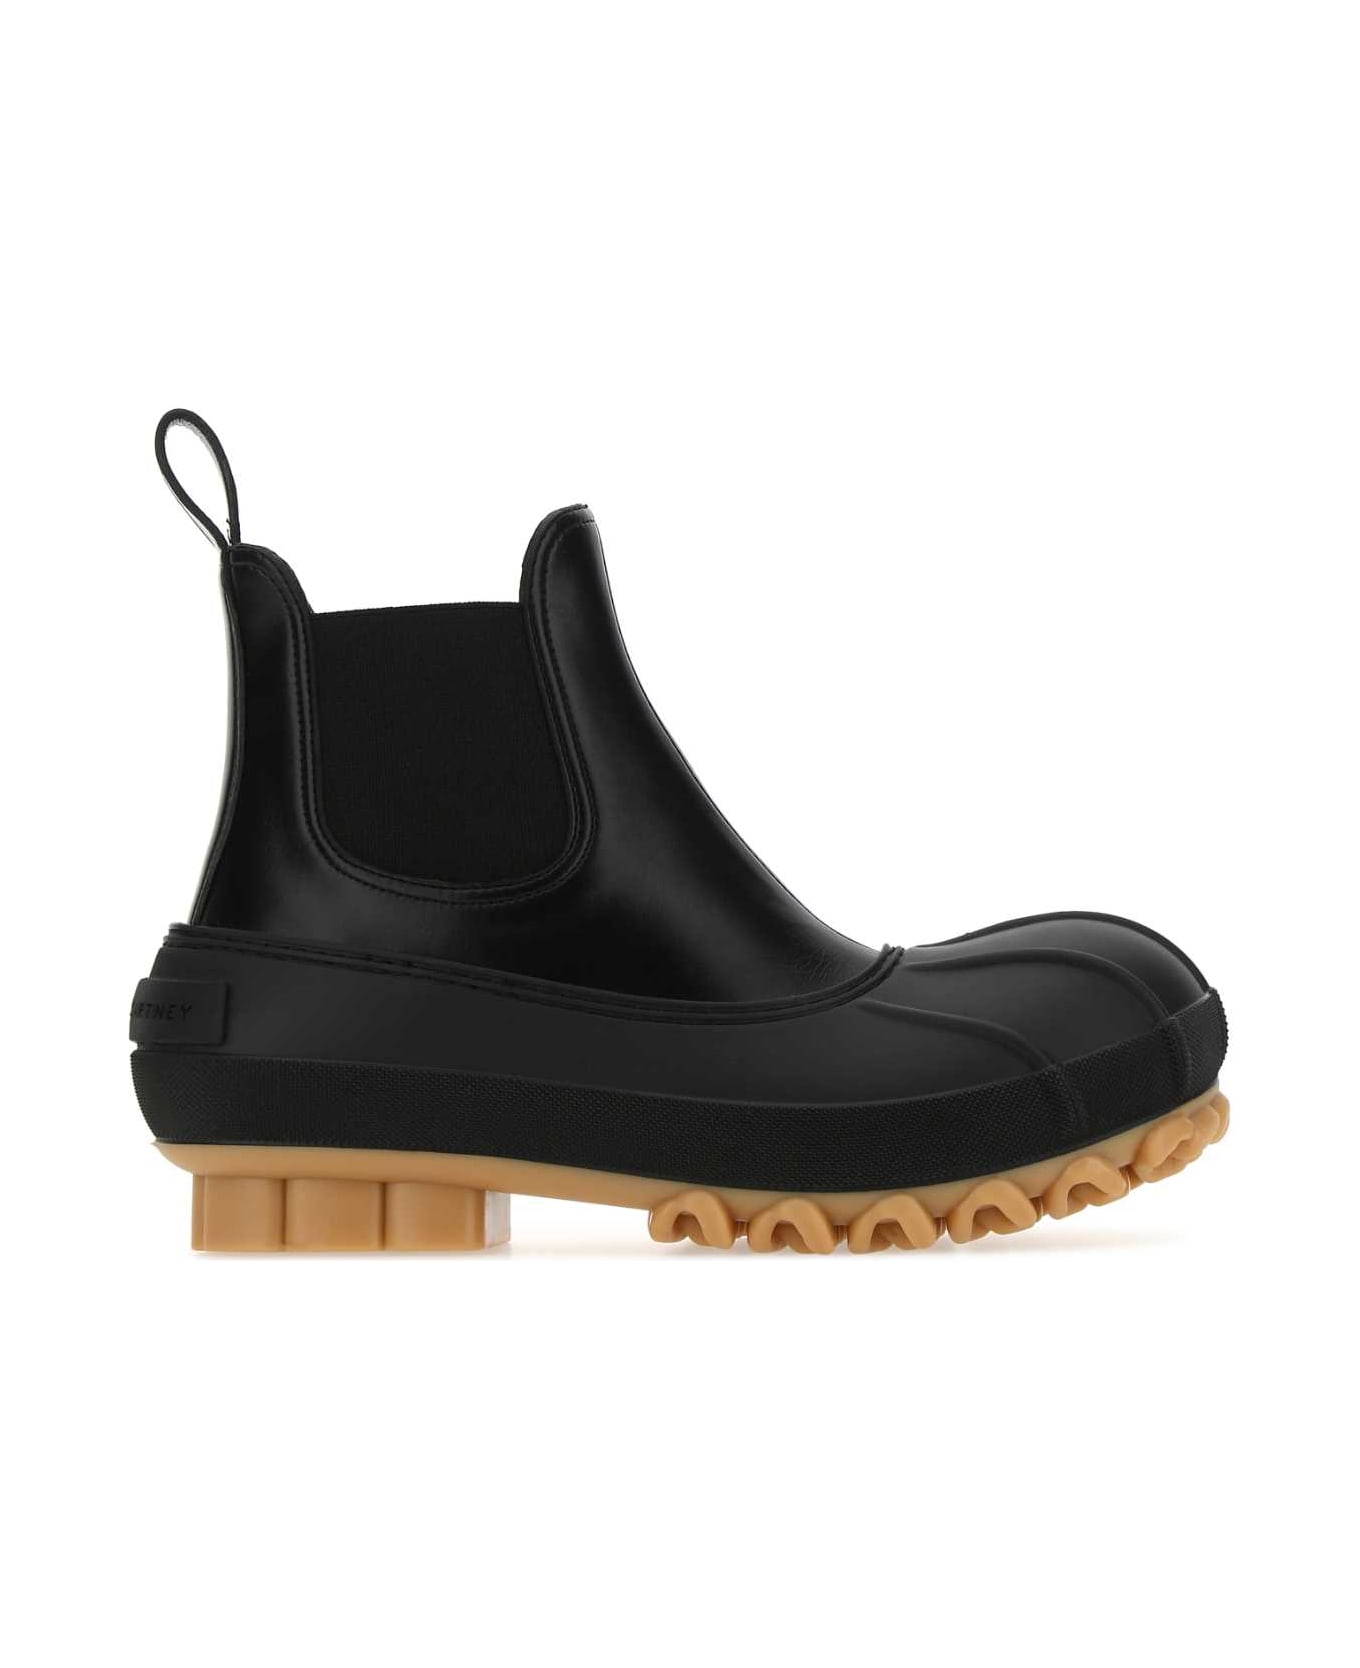 Stella McCartney Black Alter Mat And Rubber Duck City Ankle Boots - 1000